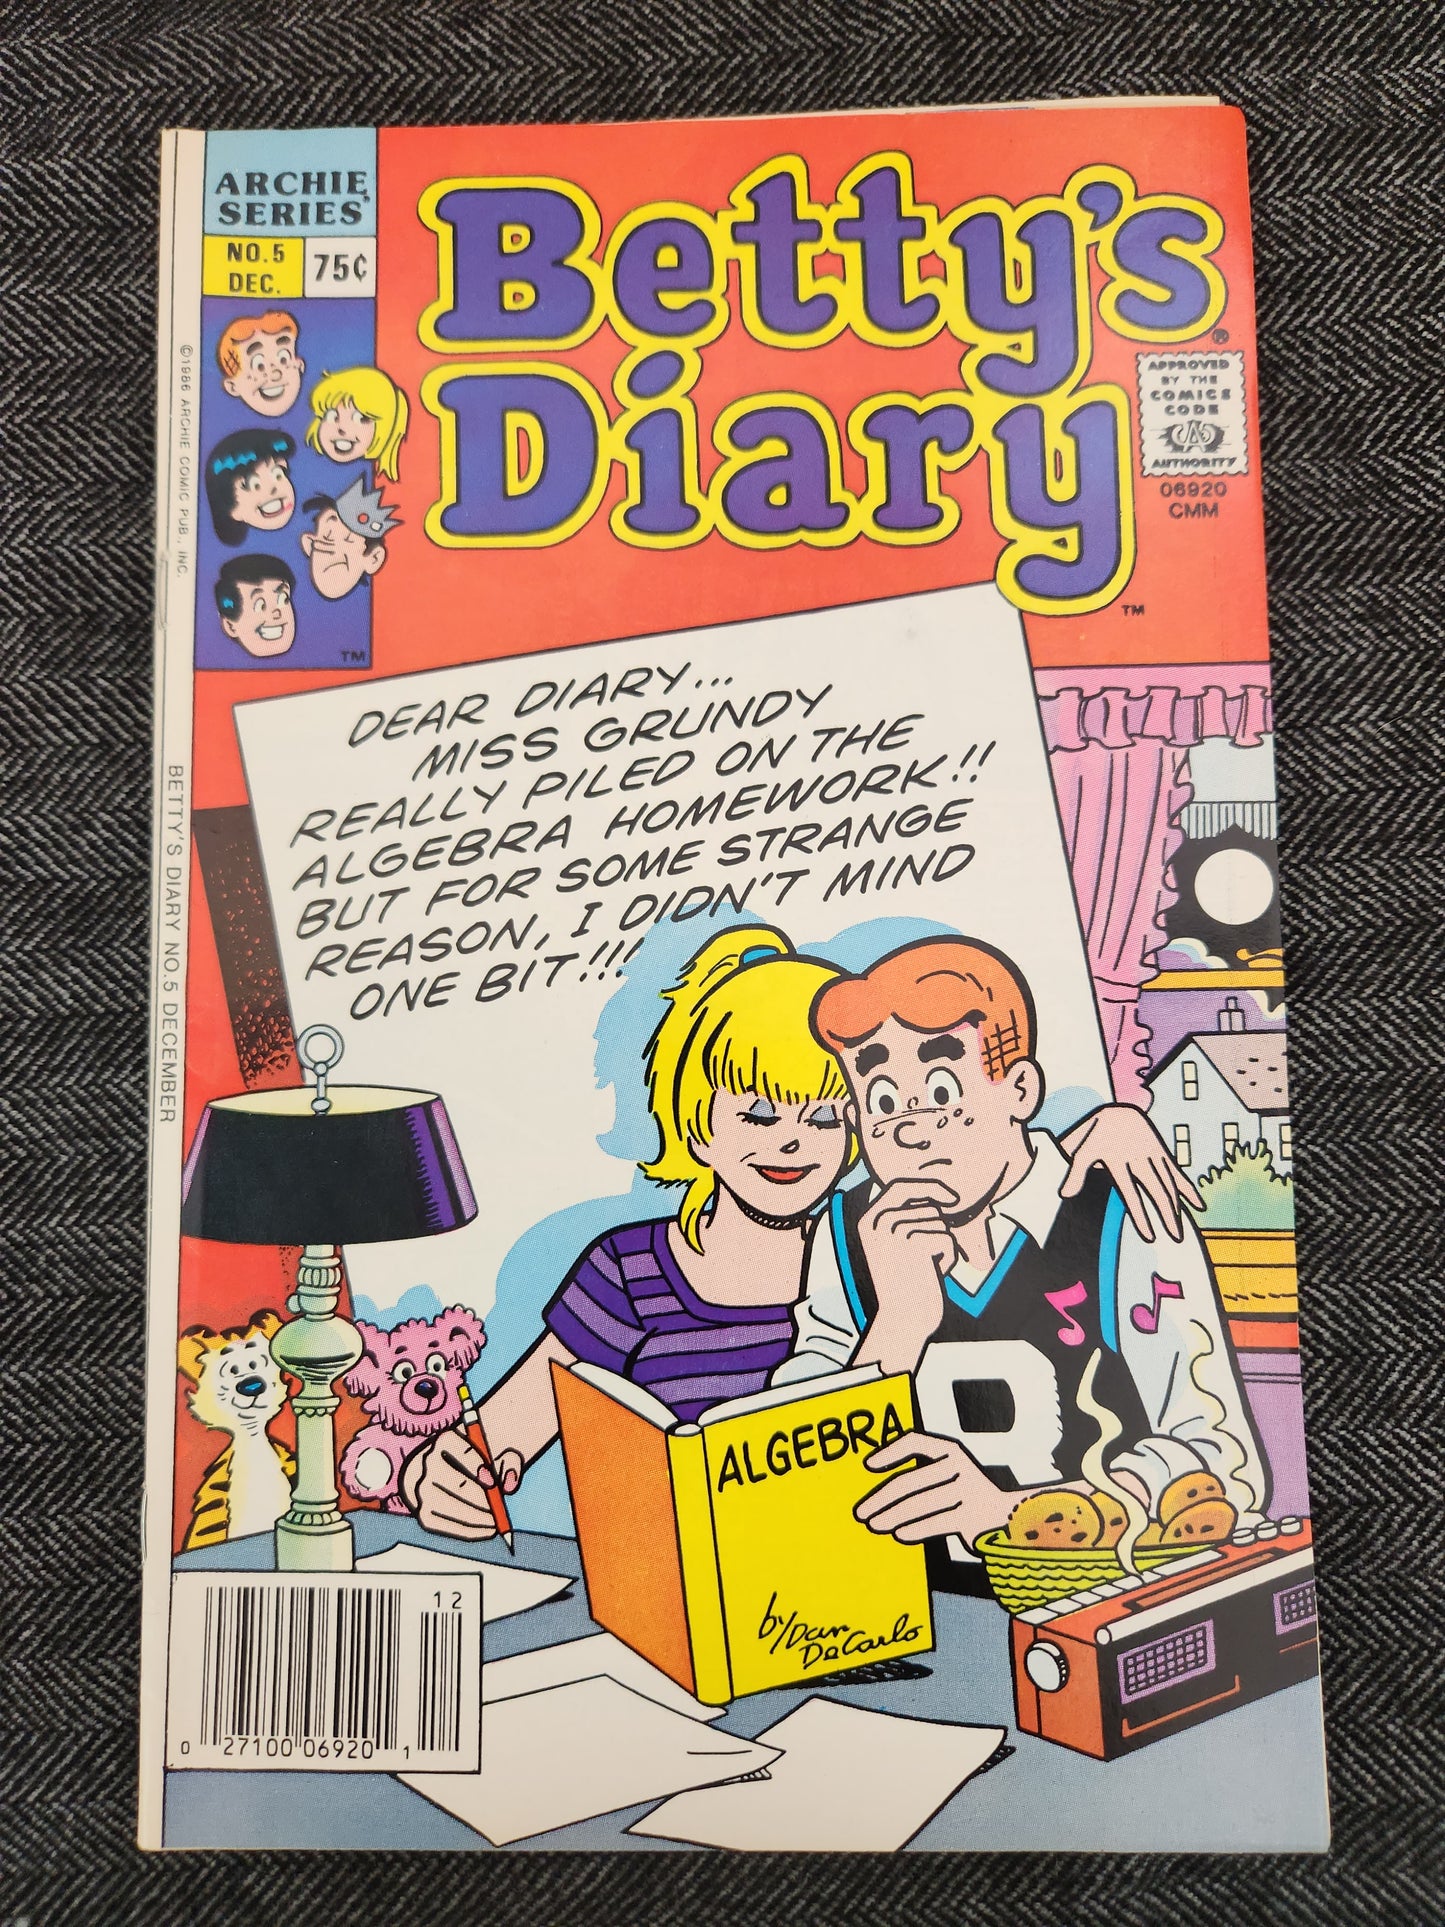 1986 Archie Series: Betty's Diary #5